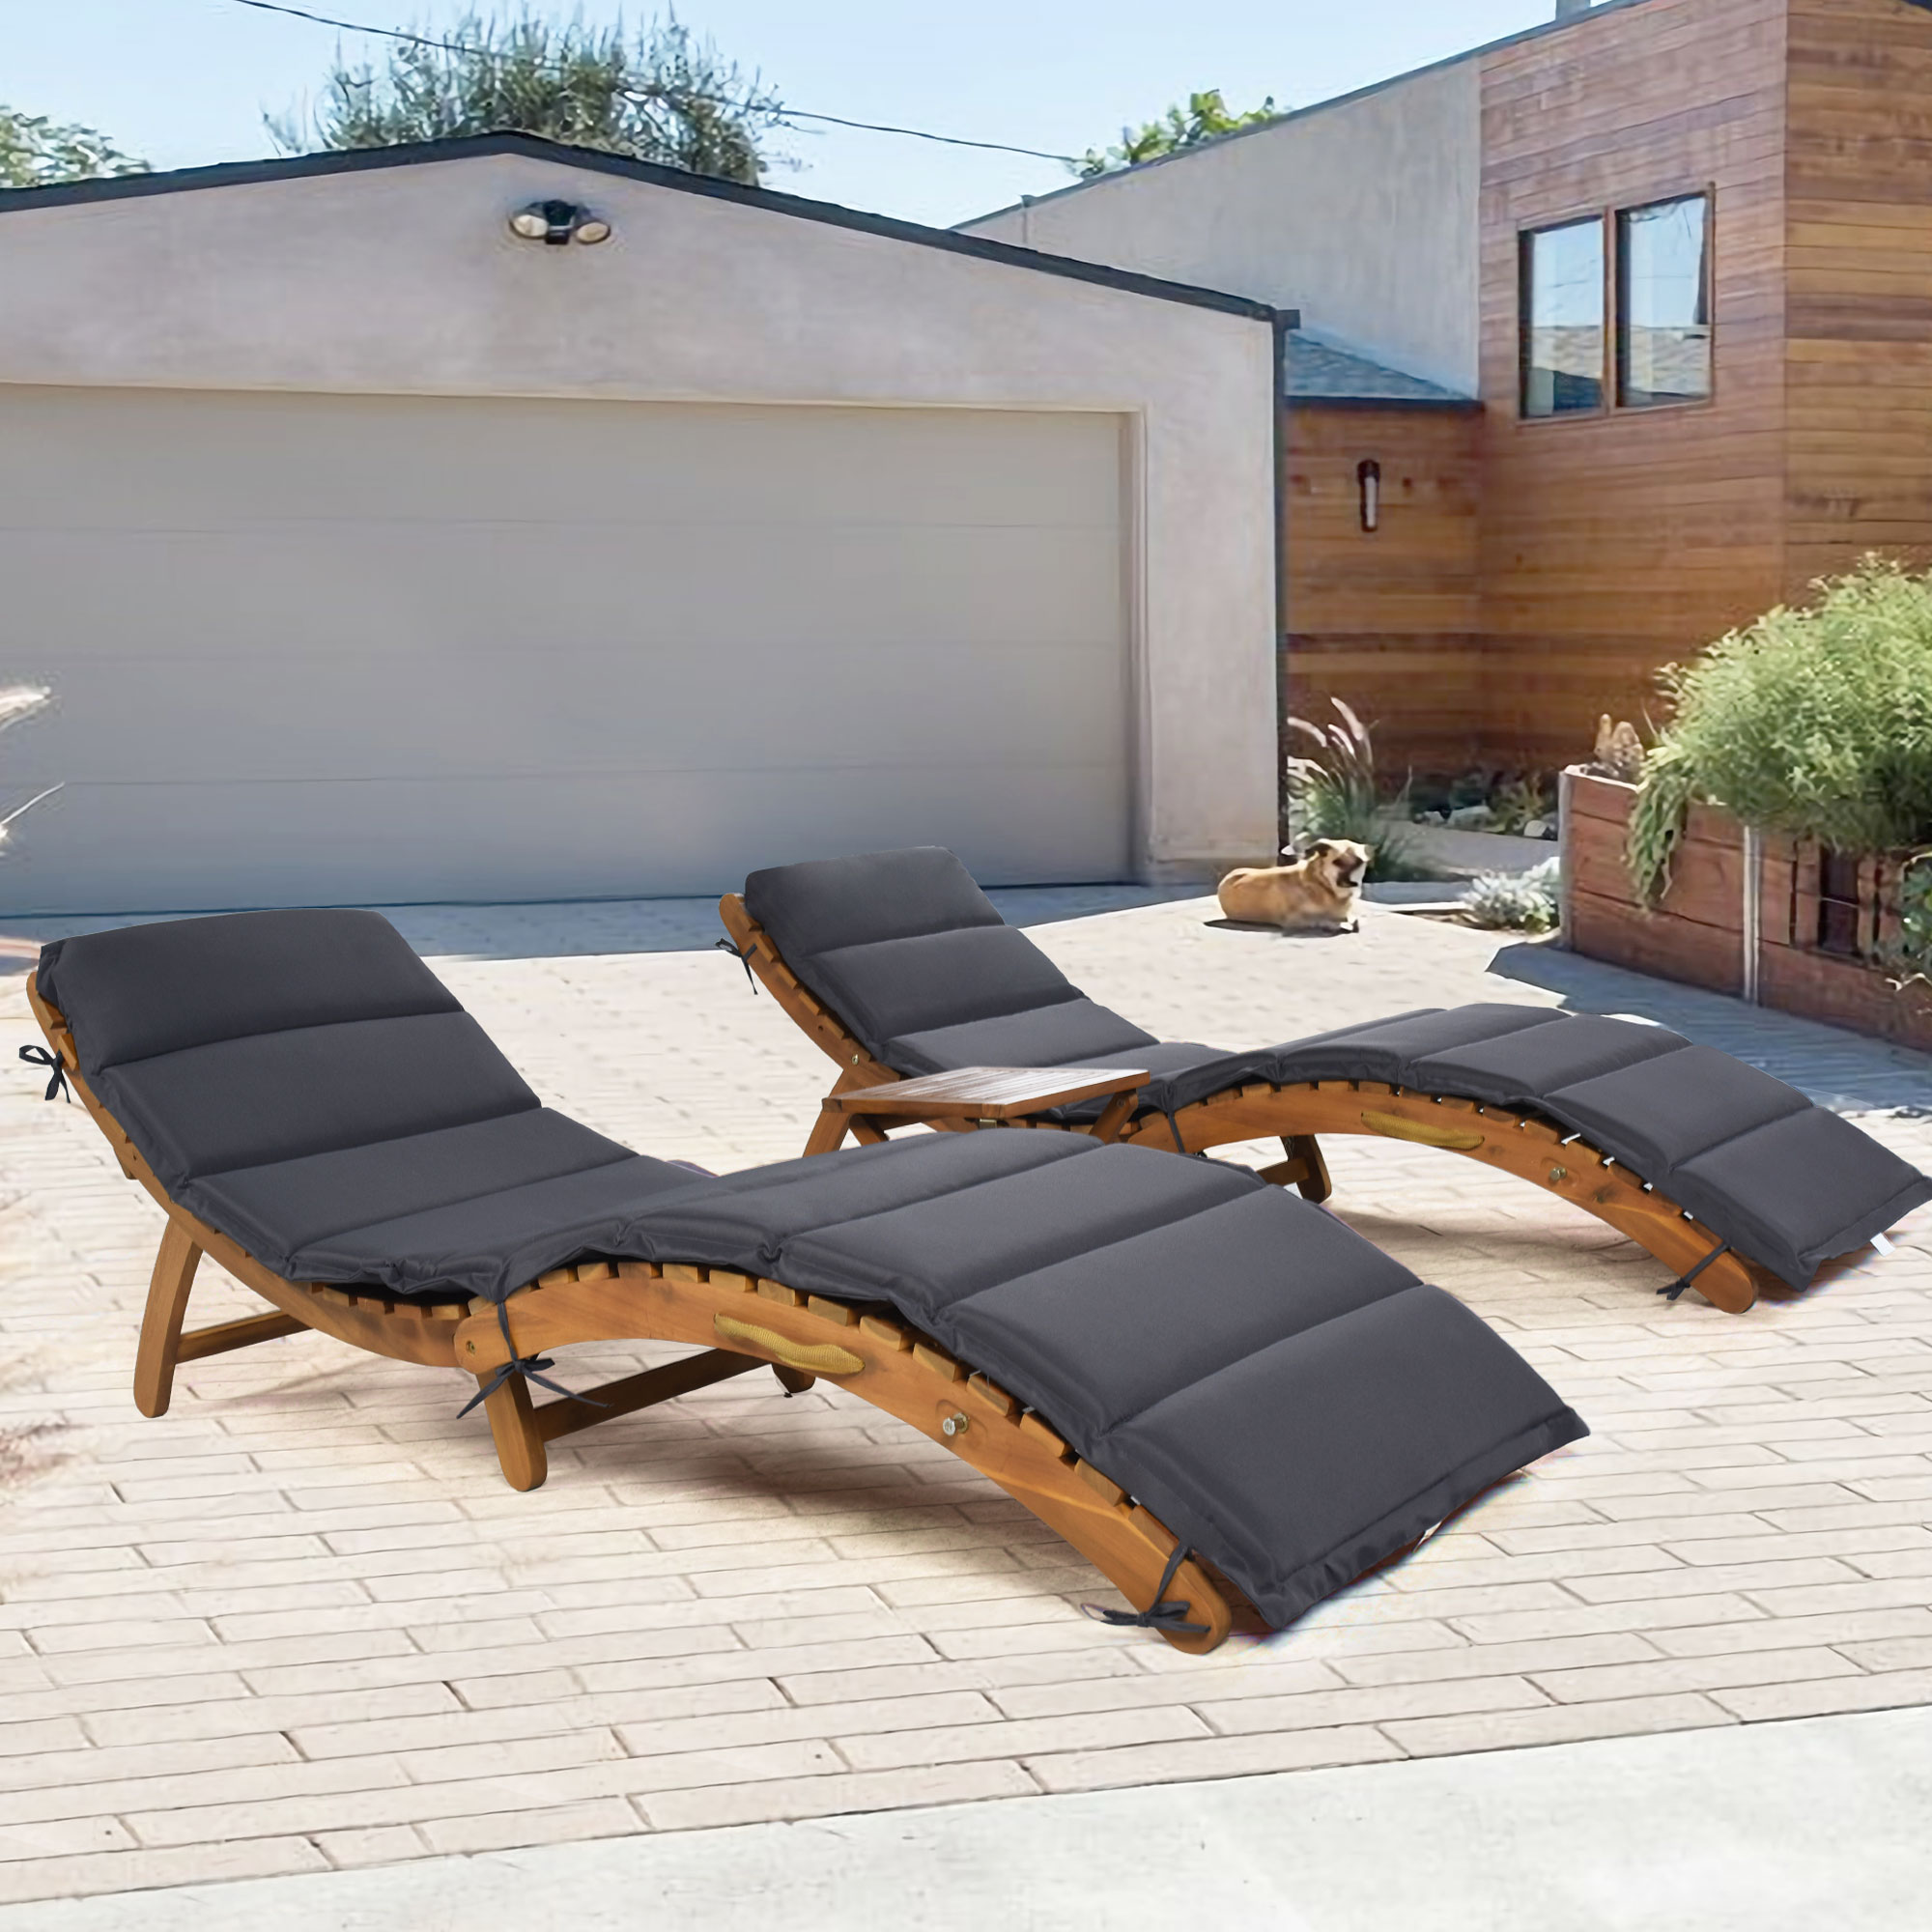 Wooden Patio Lounge Chairs, 3 Pieces S-shape Outdoor Chaise Lounge with Tea Table and Soft Cushions, Reclining Pool Beach Deck Backyard Porch Chair - image 3 of 11